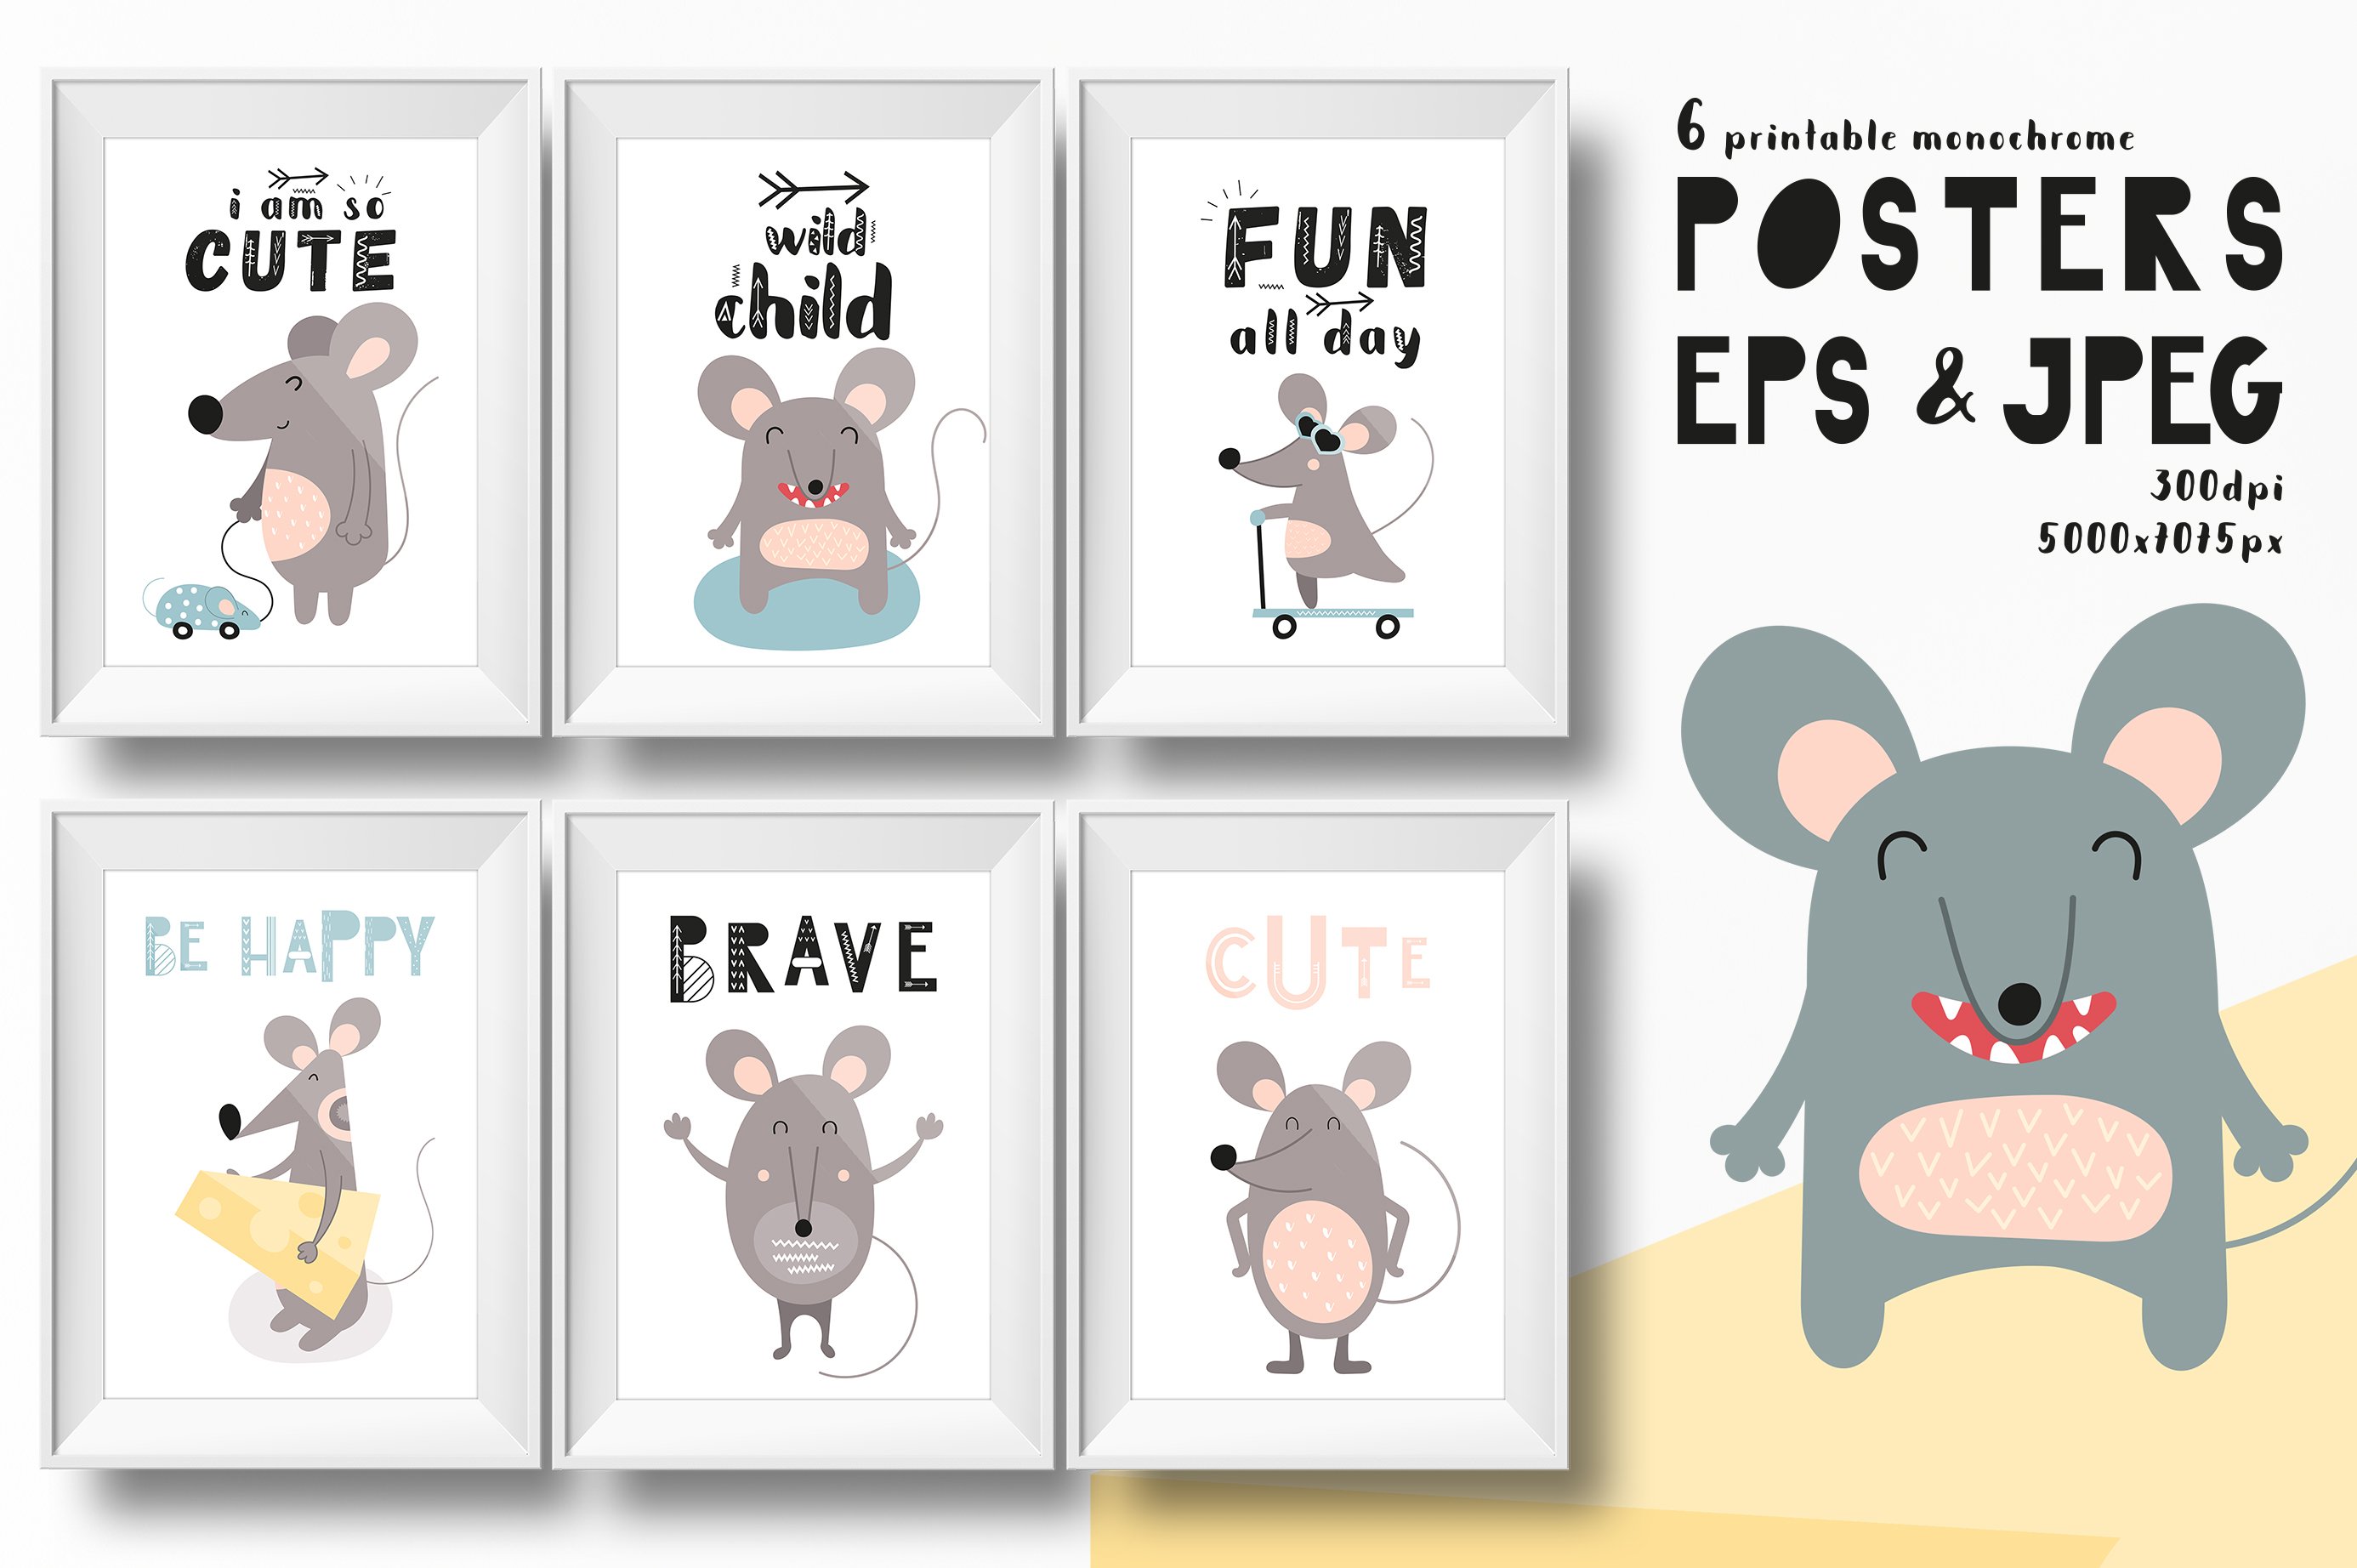 So many mouses for your poster.